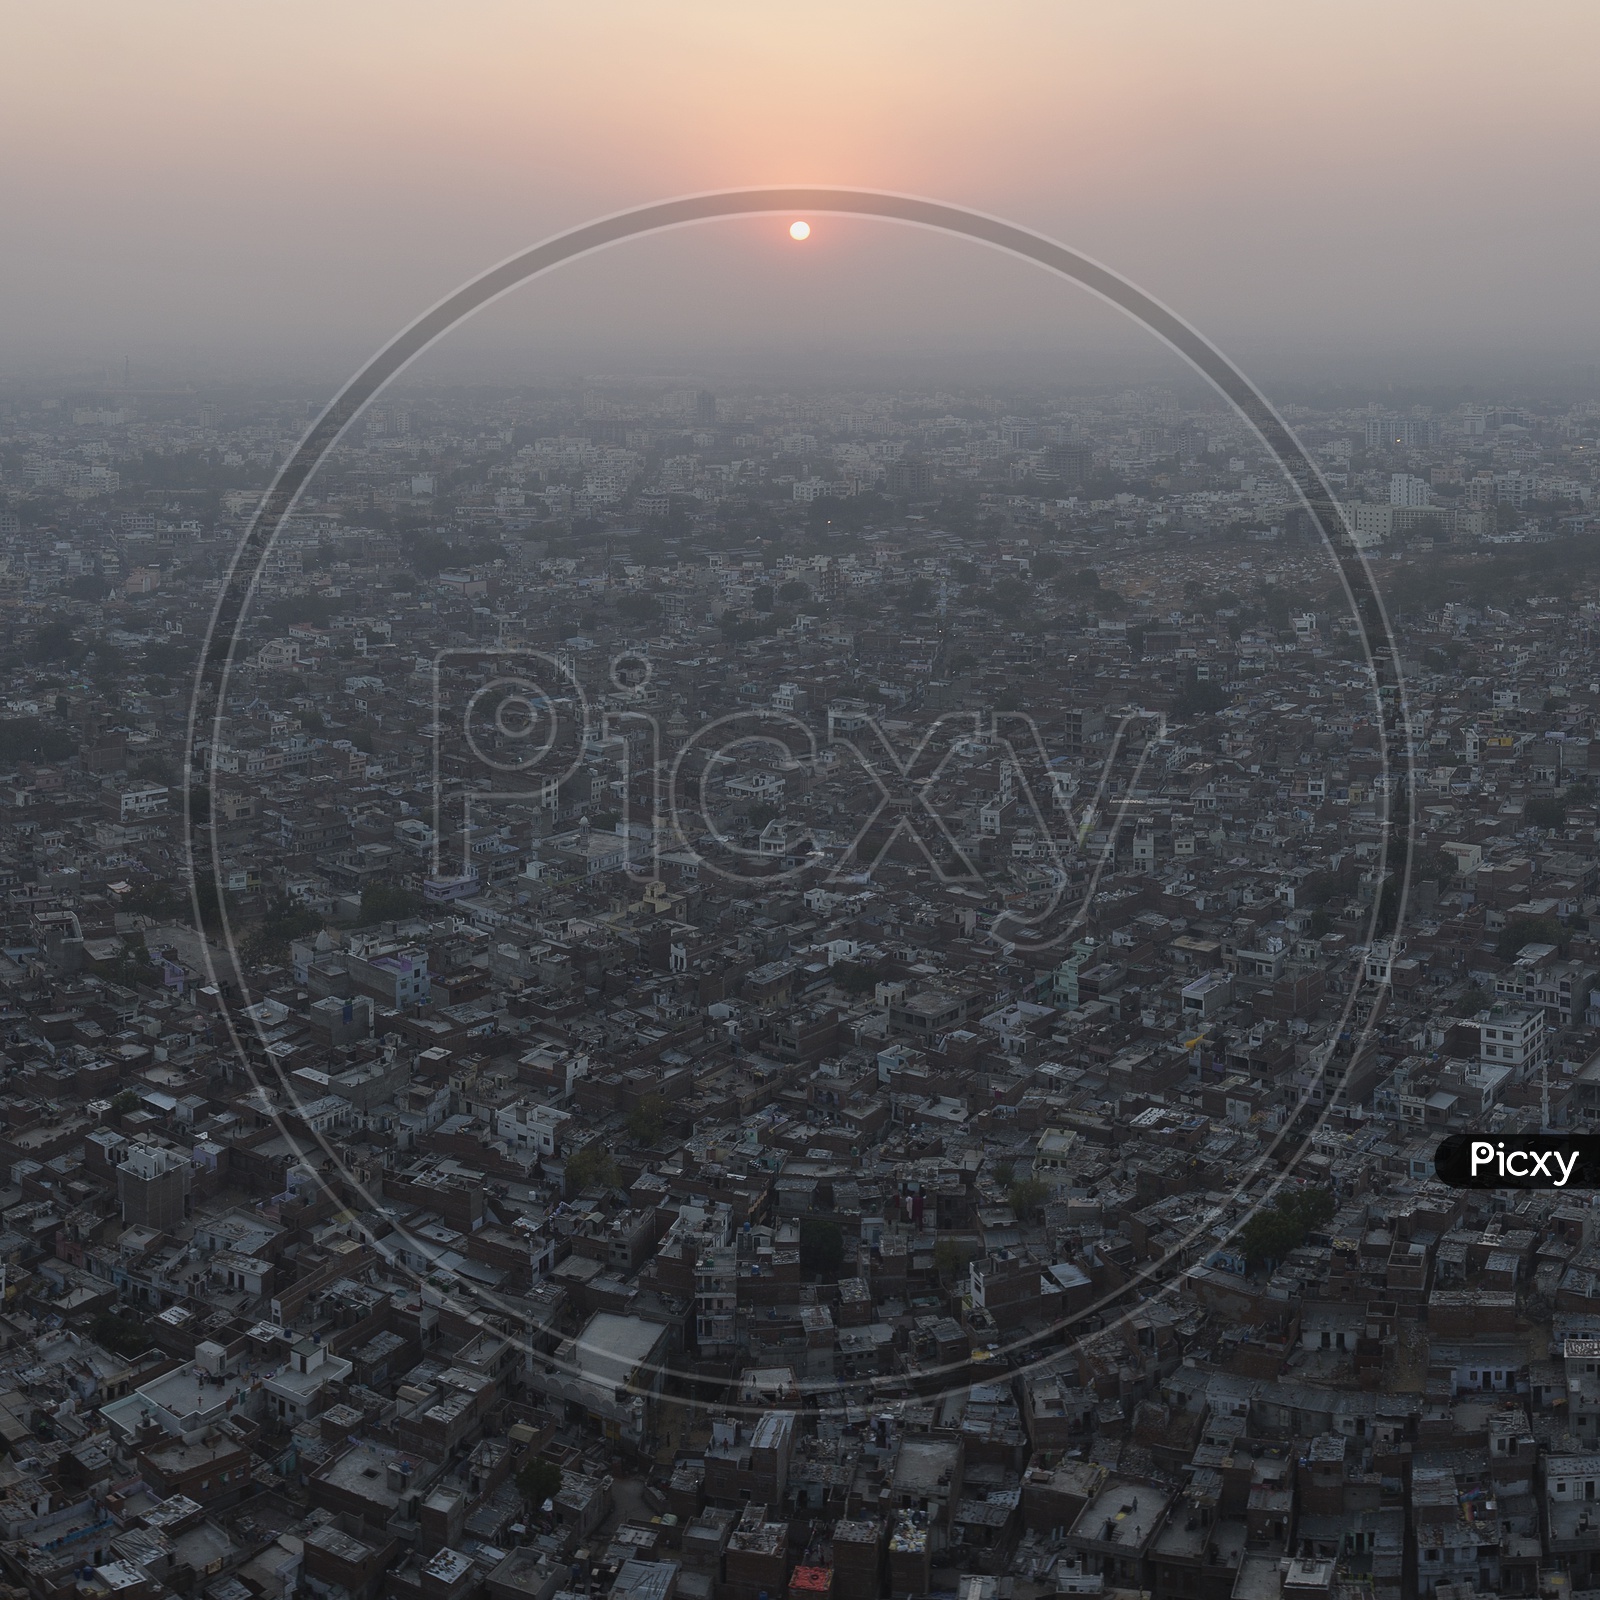 Jaipur City View Over a Sunset From The Nahargarh Fort